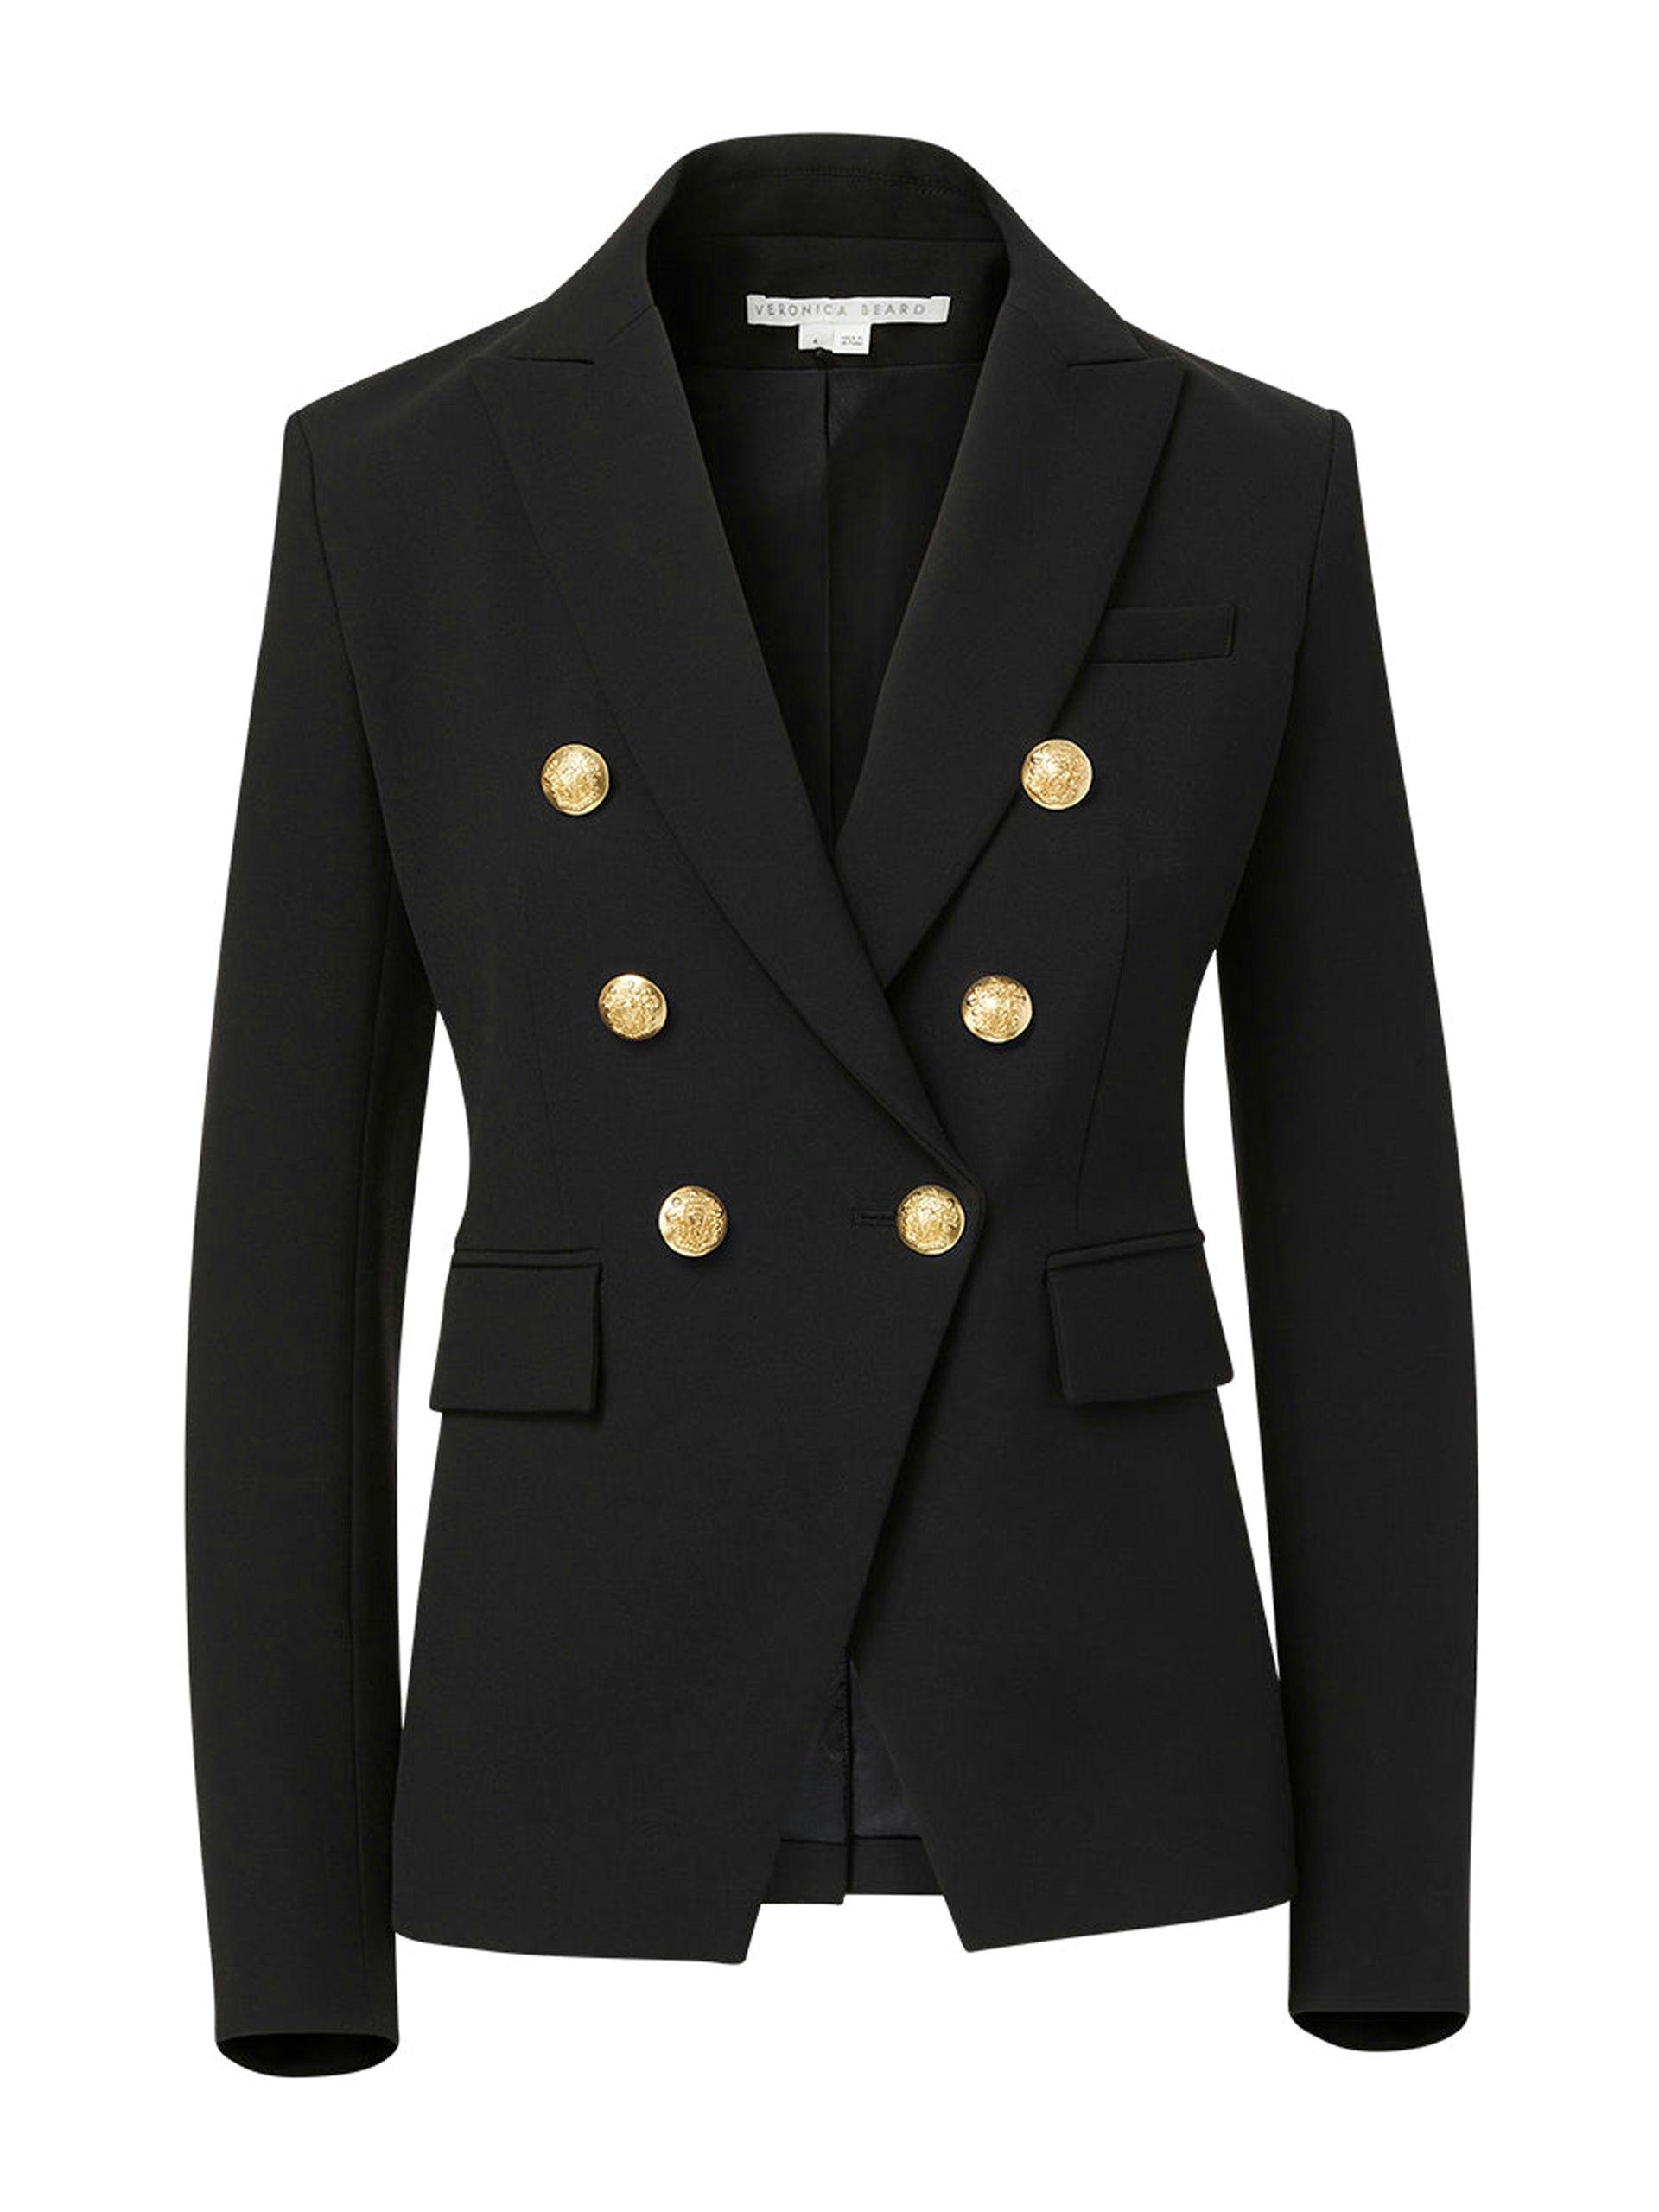 Black blazer with gold buttons